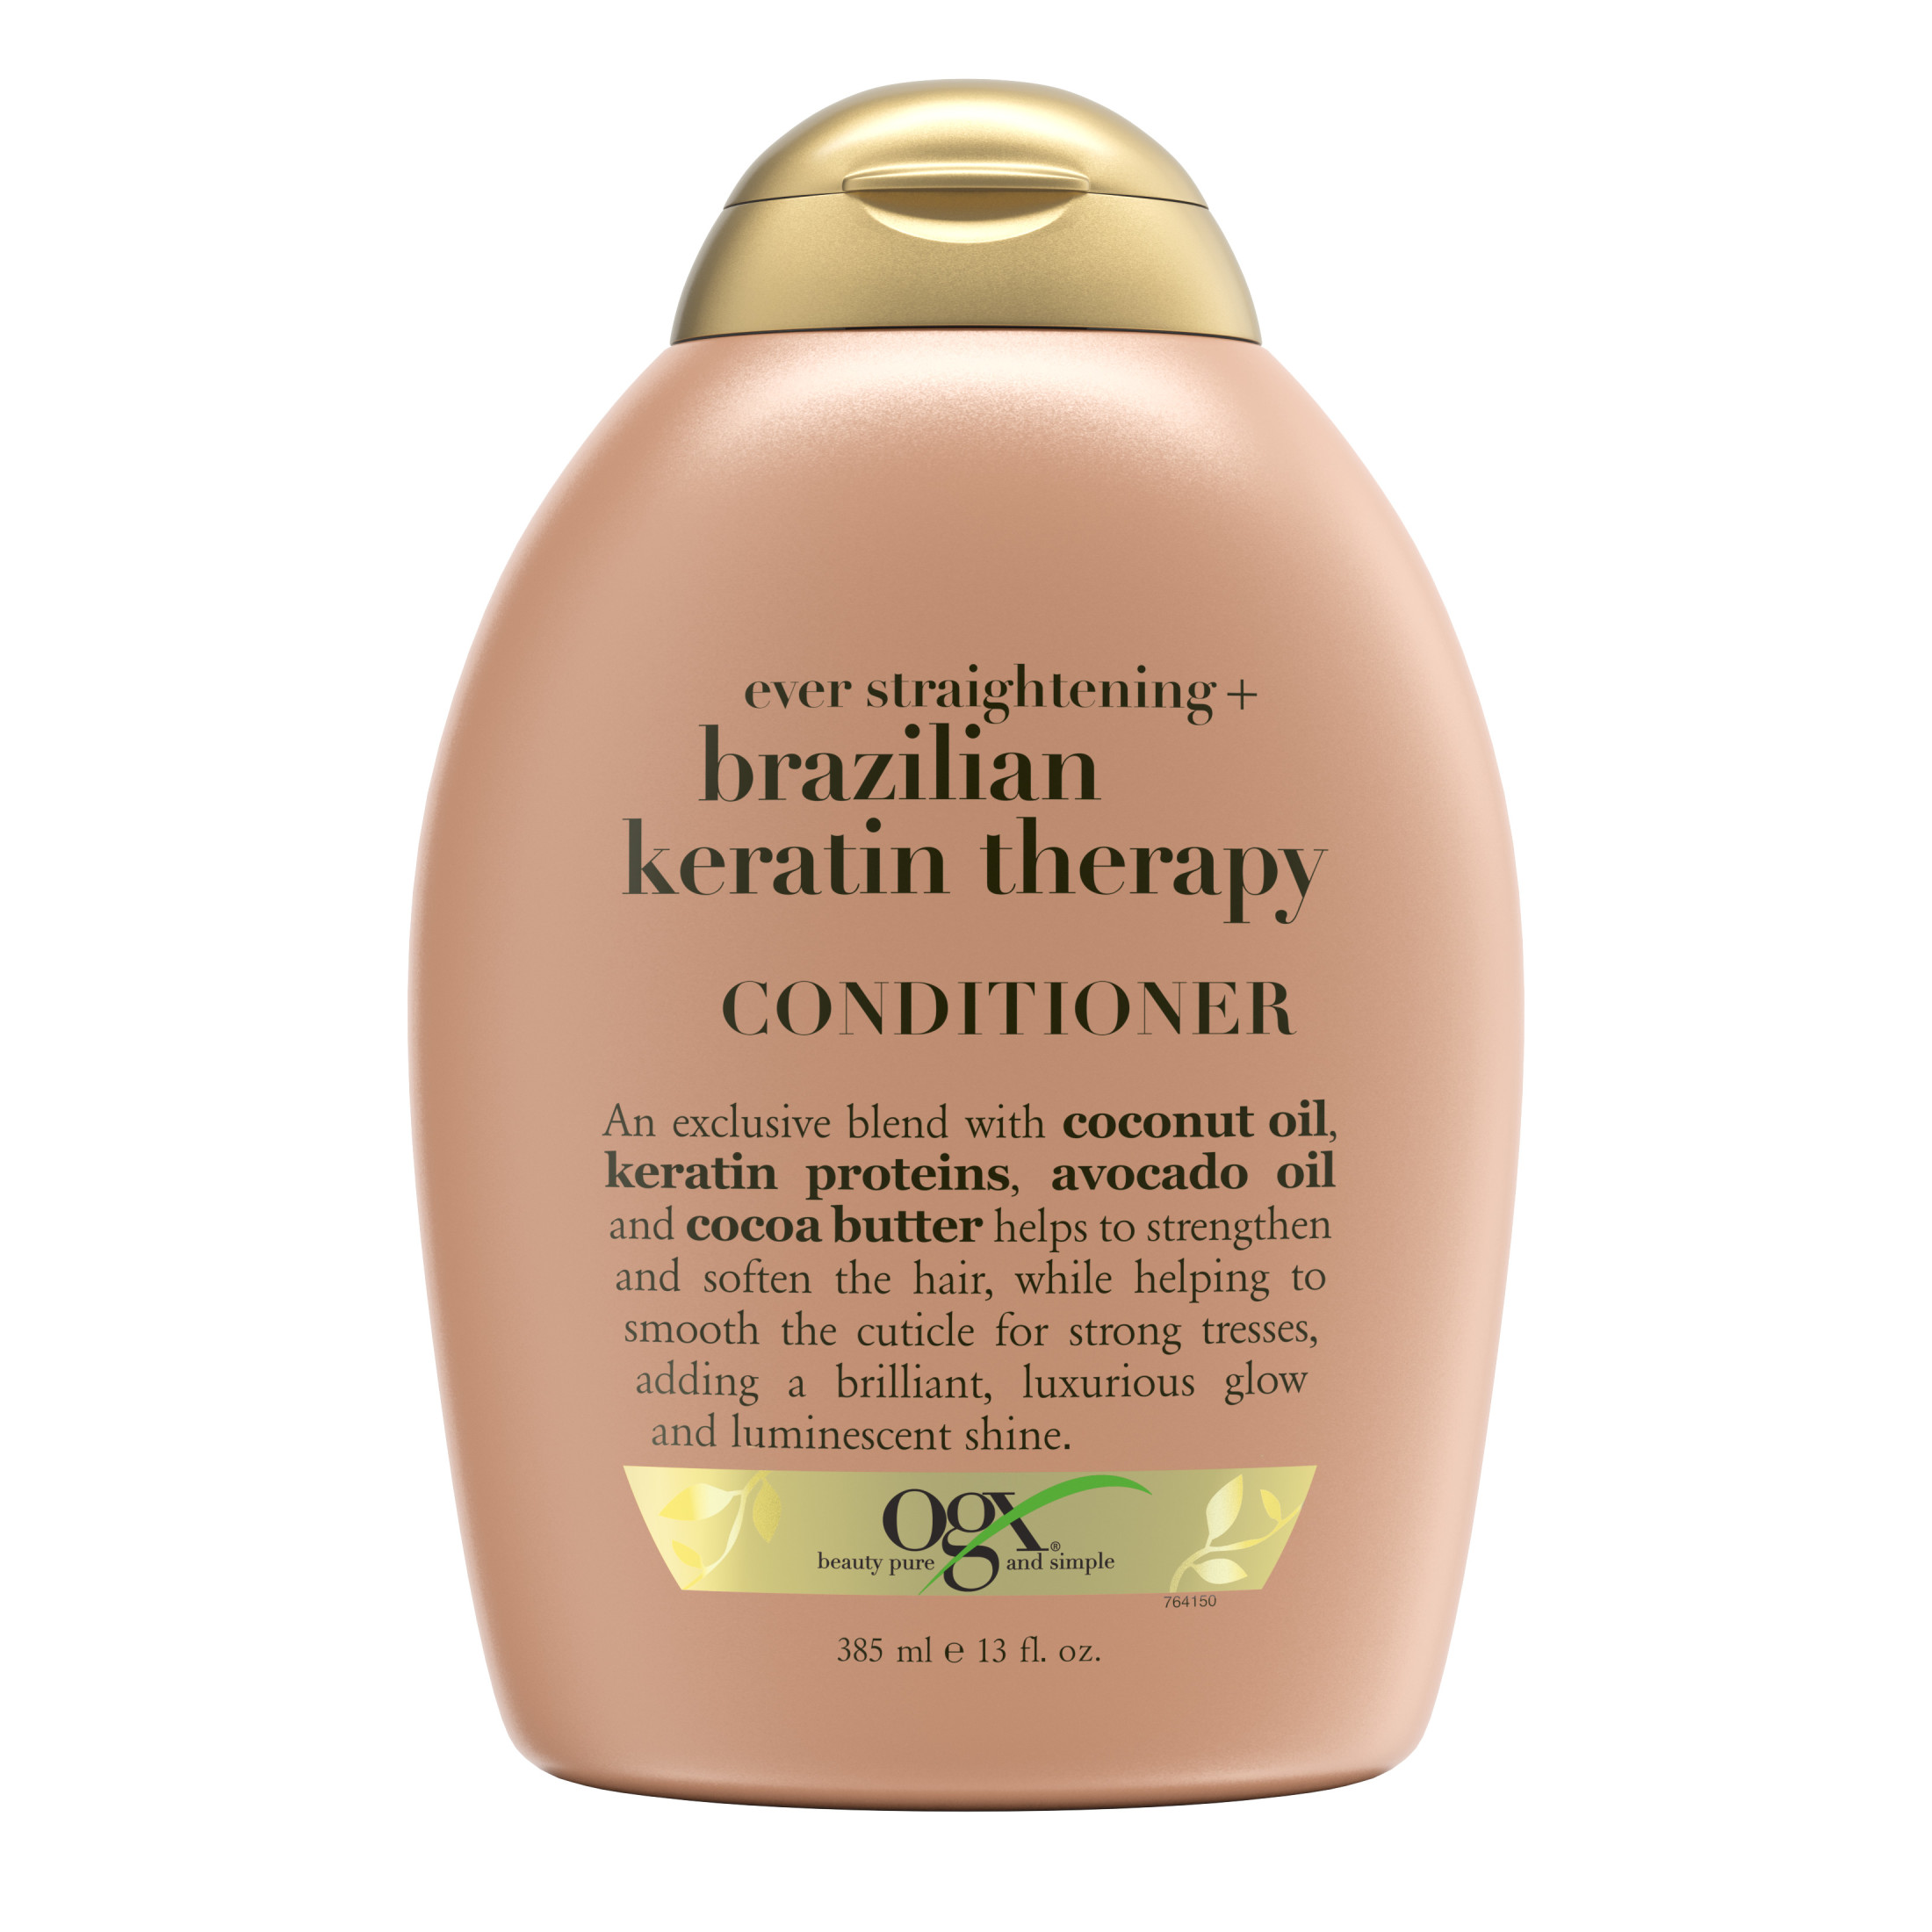 OGX Ever Straightening + Brazilian Keratin Therapy Hair-Smoothing Daily Conditioner, 13 fl oz - image 1 of 7